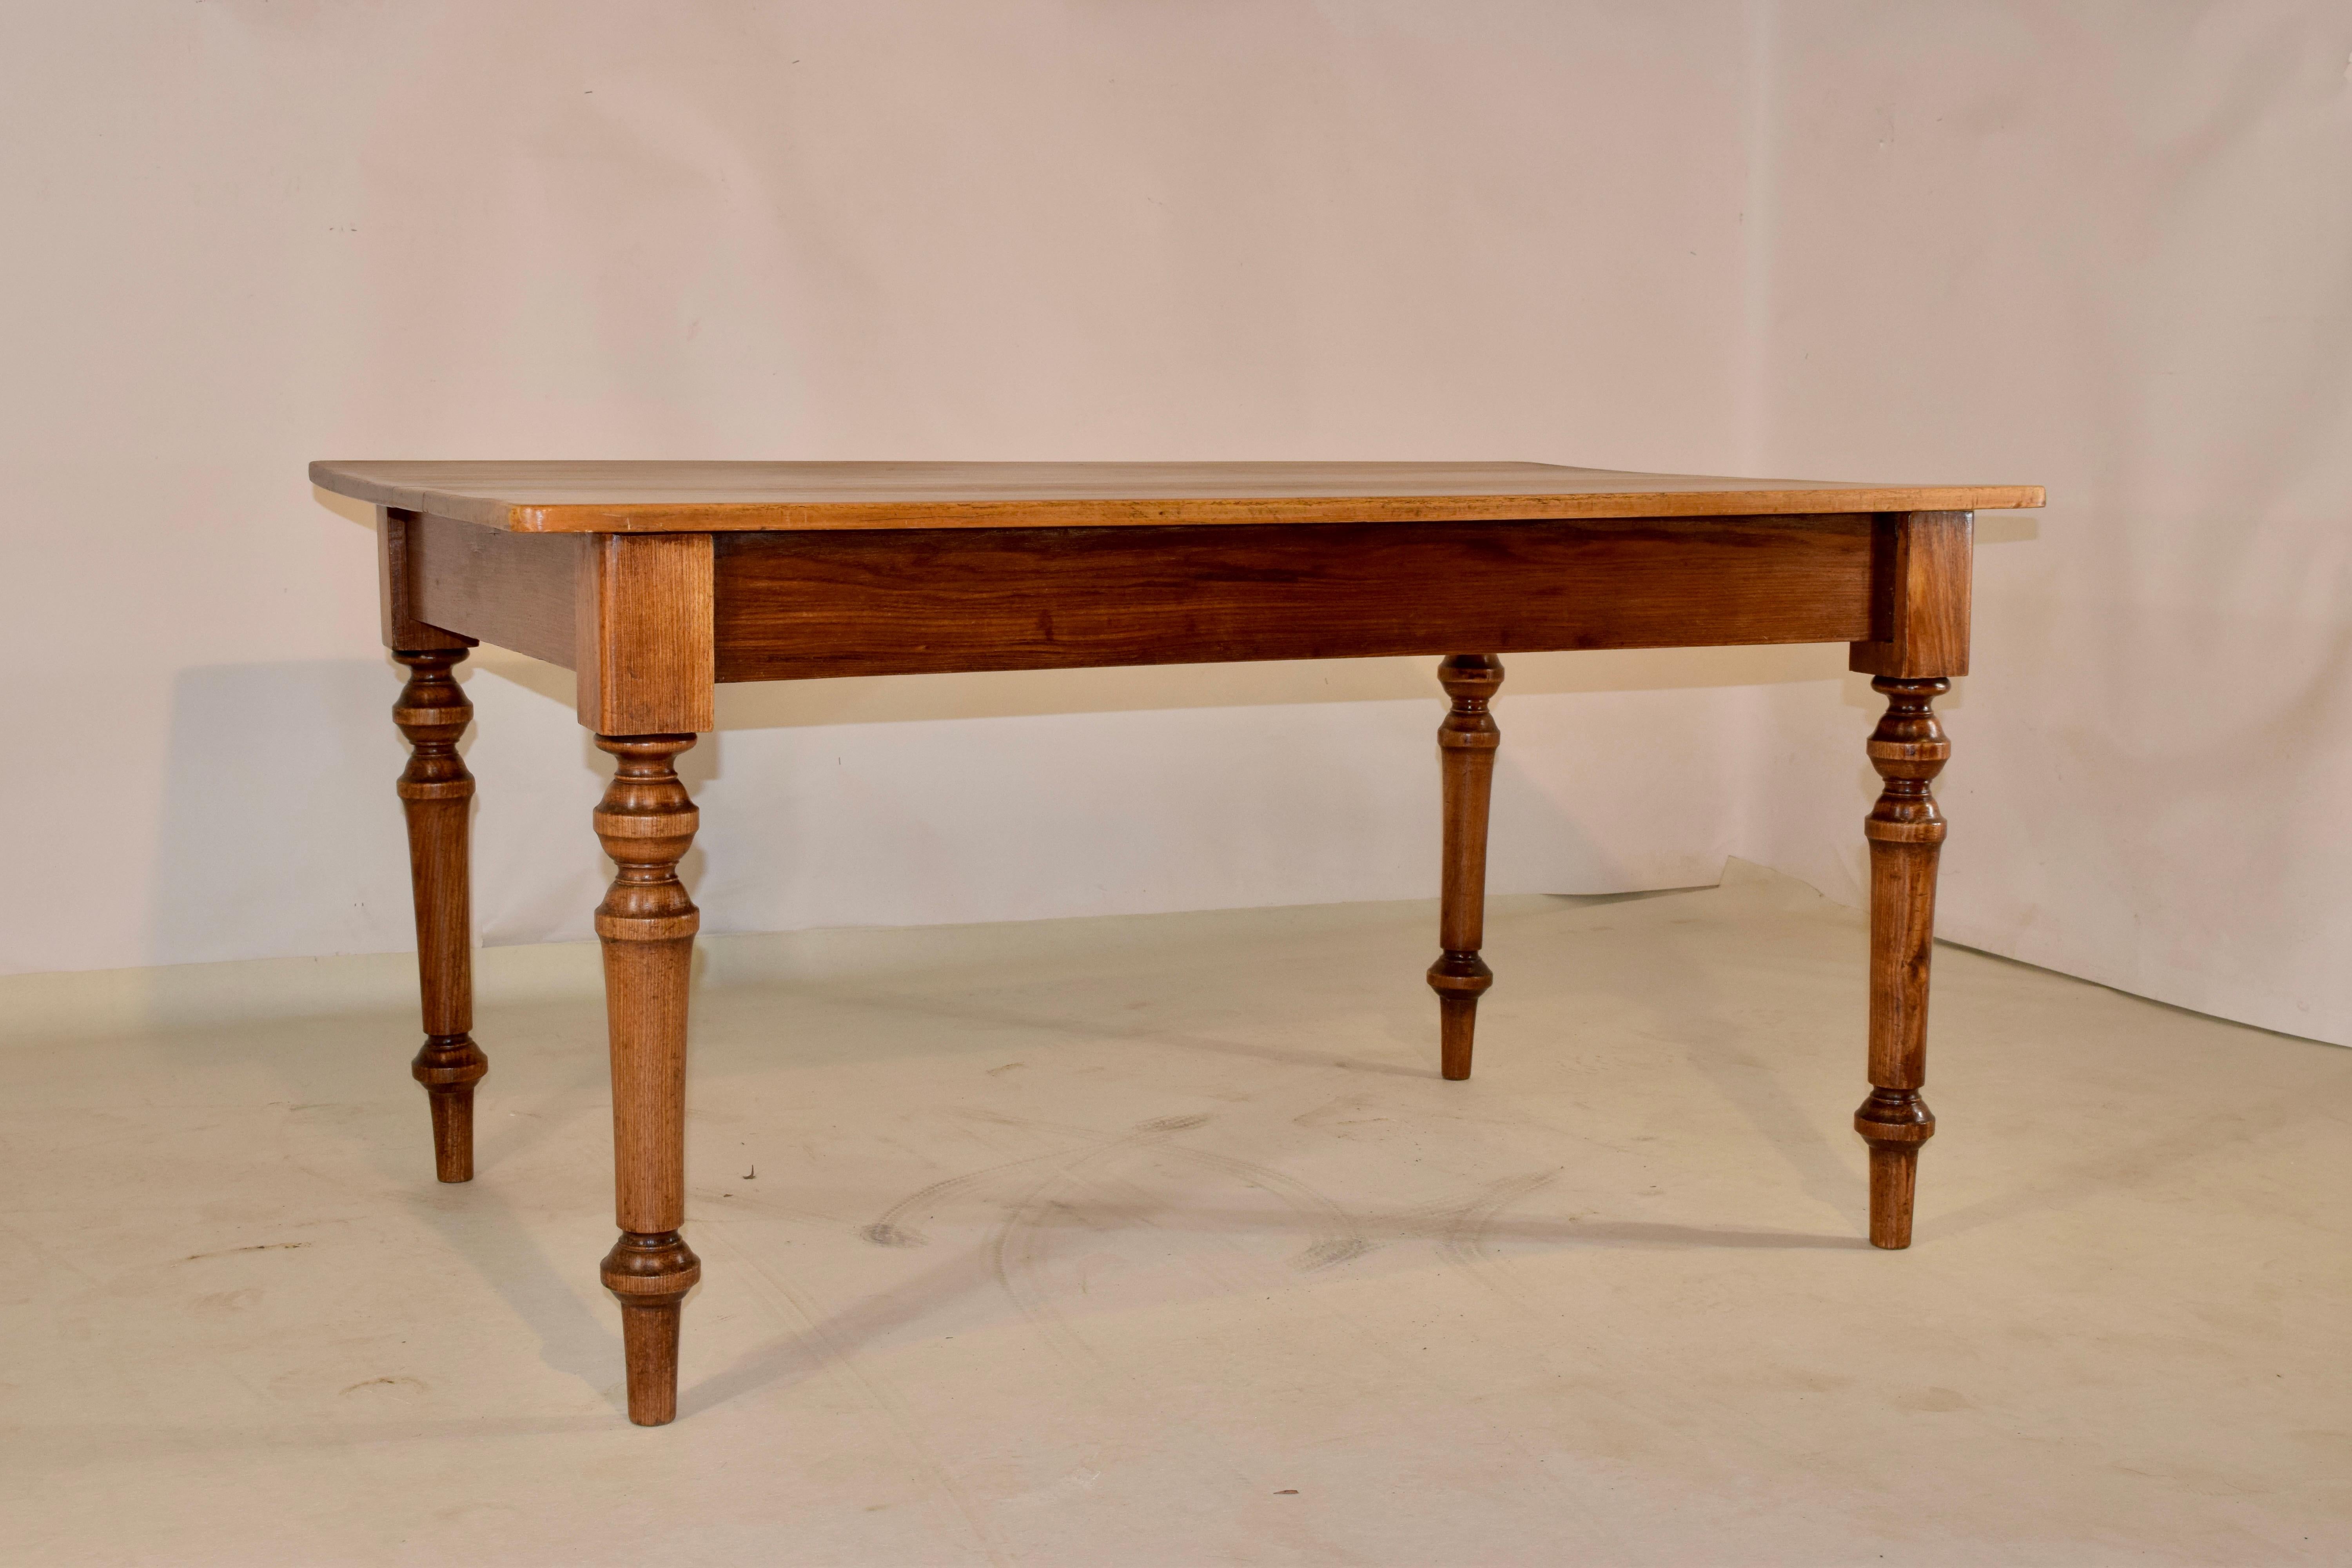 19th century English farm table with a pine top and oak base. The top is wonderfully colored and grained, over a simple apron, which measures 24.25 inches in height. The table is supported on hand turned legs.